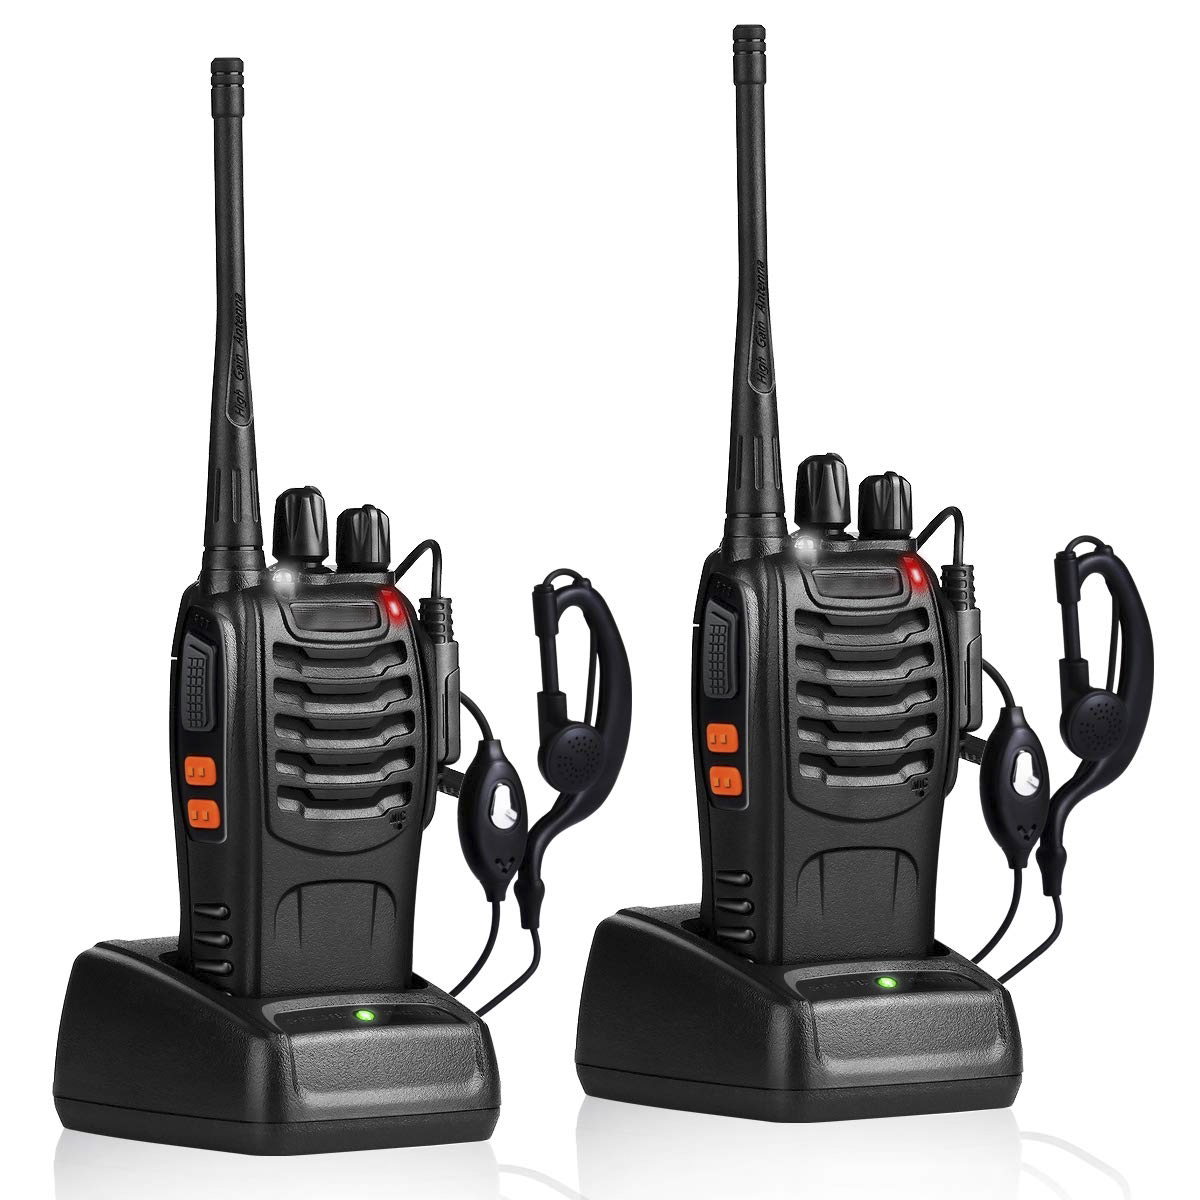 Walkie Talkies Rechargeable Long Range Two-Way Radios with Earpieces,2-Way Radios UHF Handheld Transceiver Walky Talky with Flashlight Li-ion Battery and Charger（2 Pack）-OXIMETERBUY